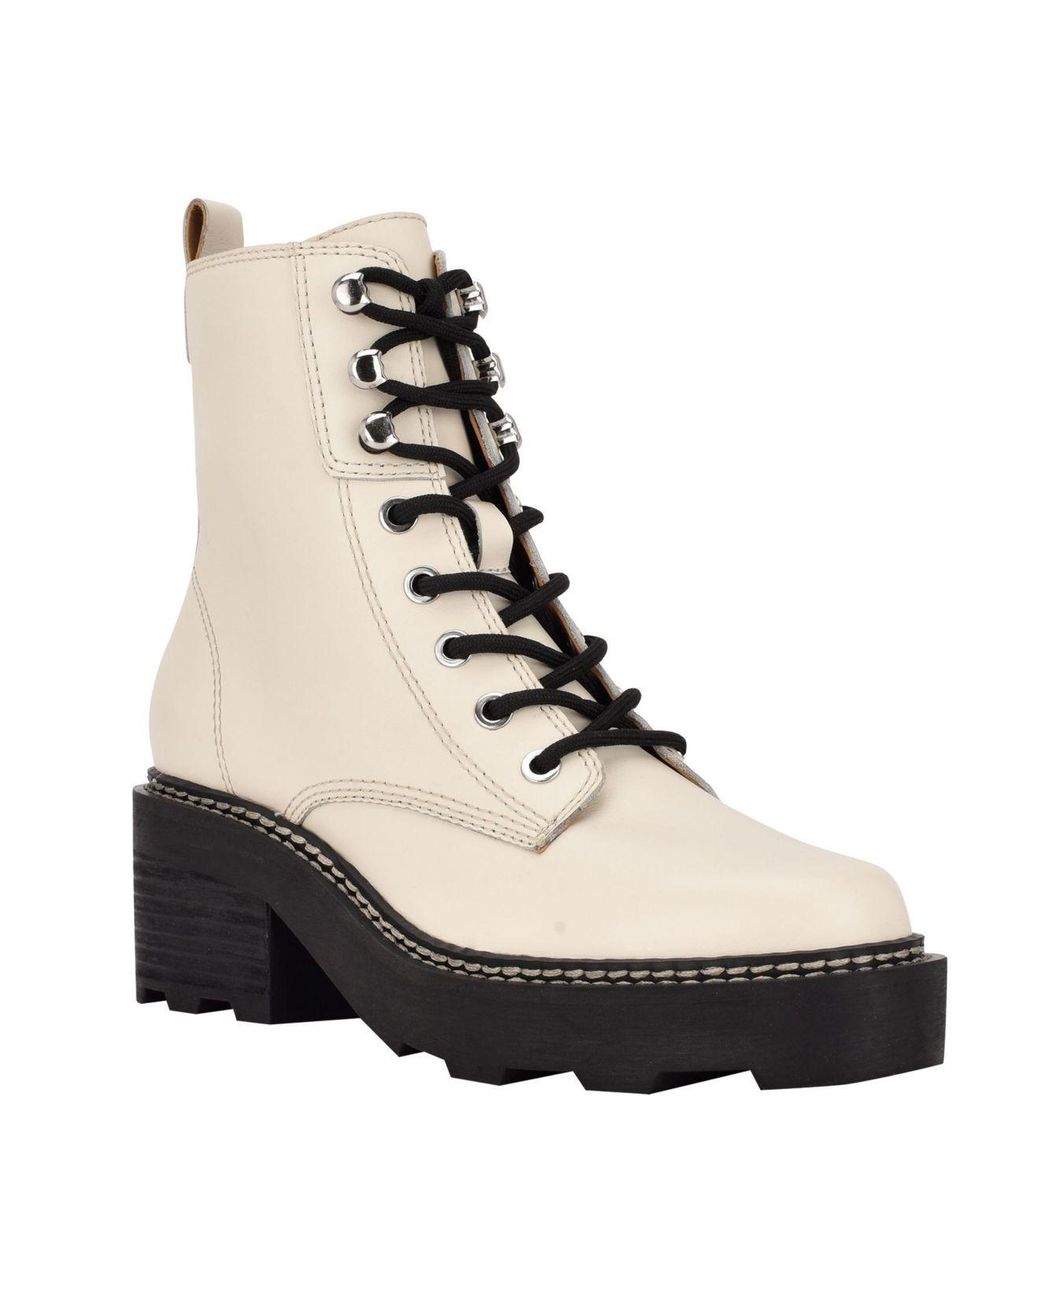 Calvin Klein Abeni Heeled Lace Up Lug Sole Combat Boots in Natural | Lyst